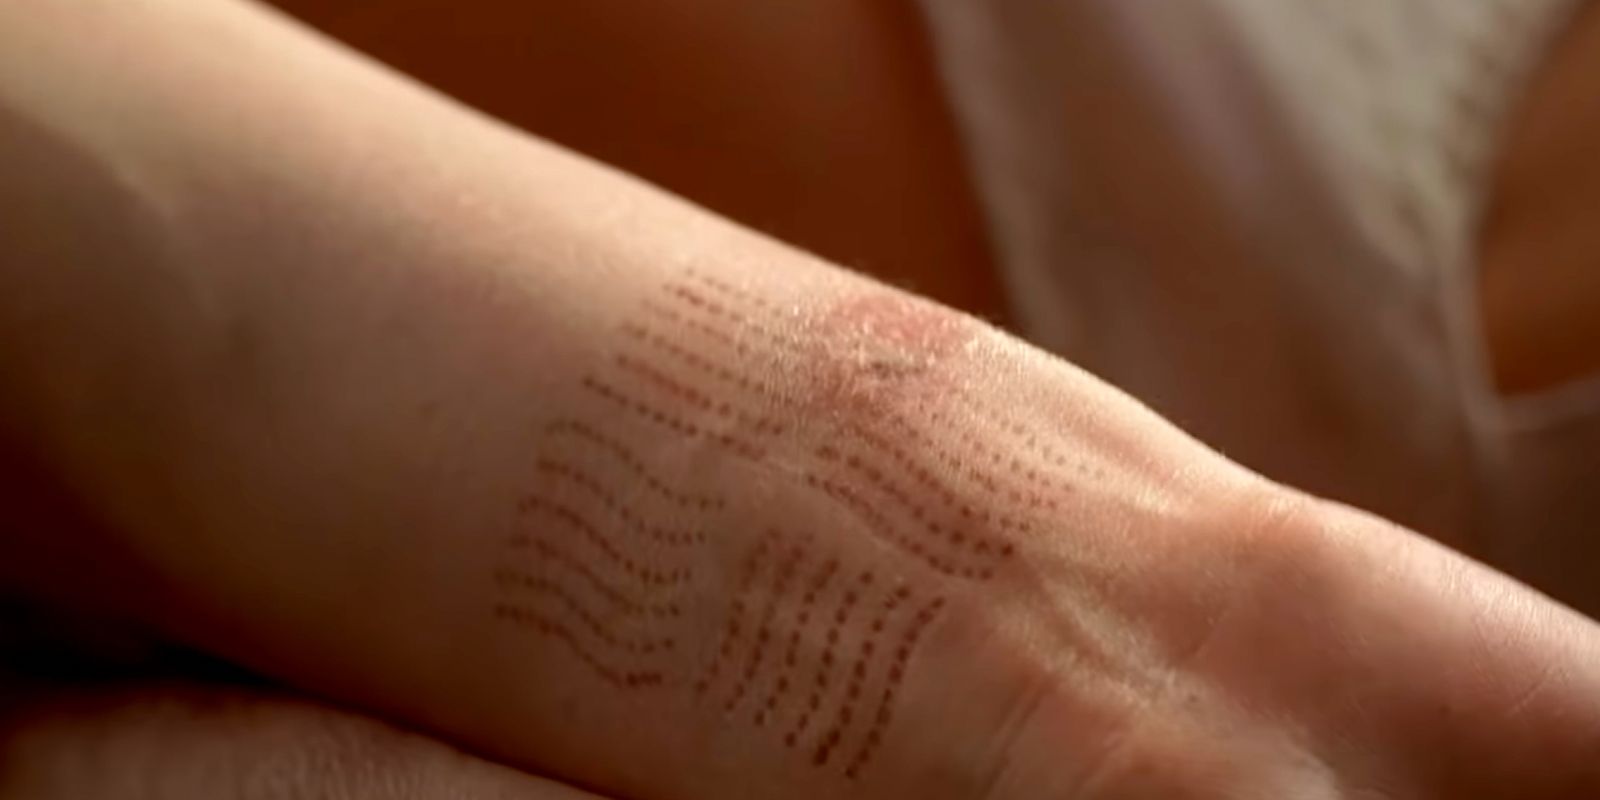 Leeloo's tattoo in The Fifth Element